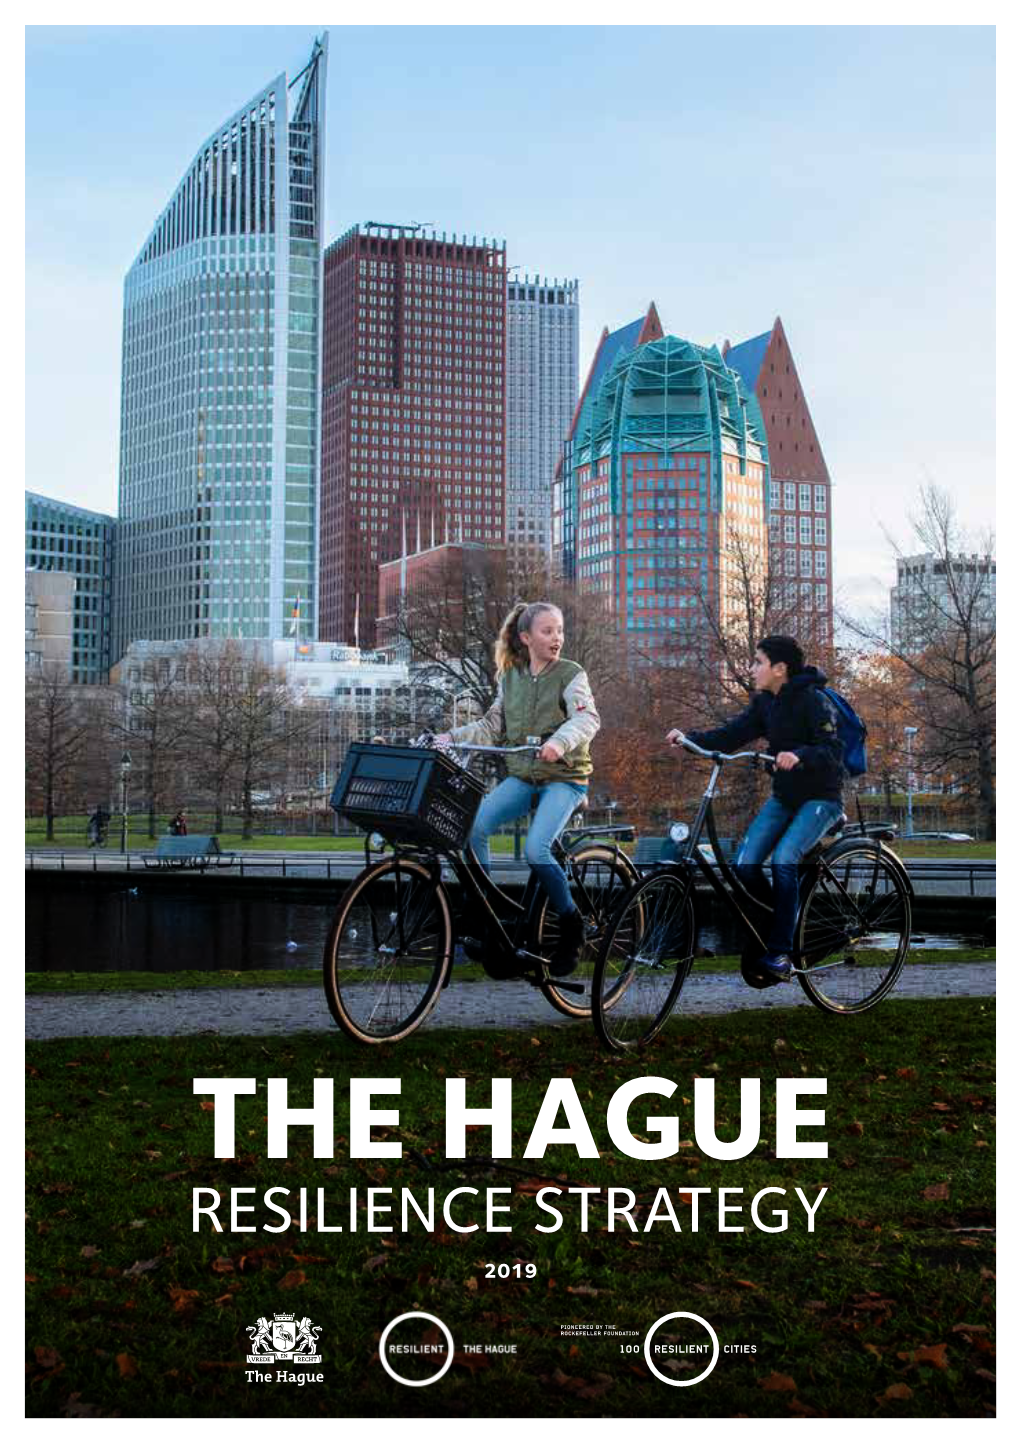 THE HAGUE RESILIENCE STRATEGY 10 Simple Things You Can Do Right Now to Become More Resilient